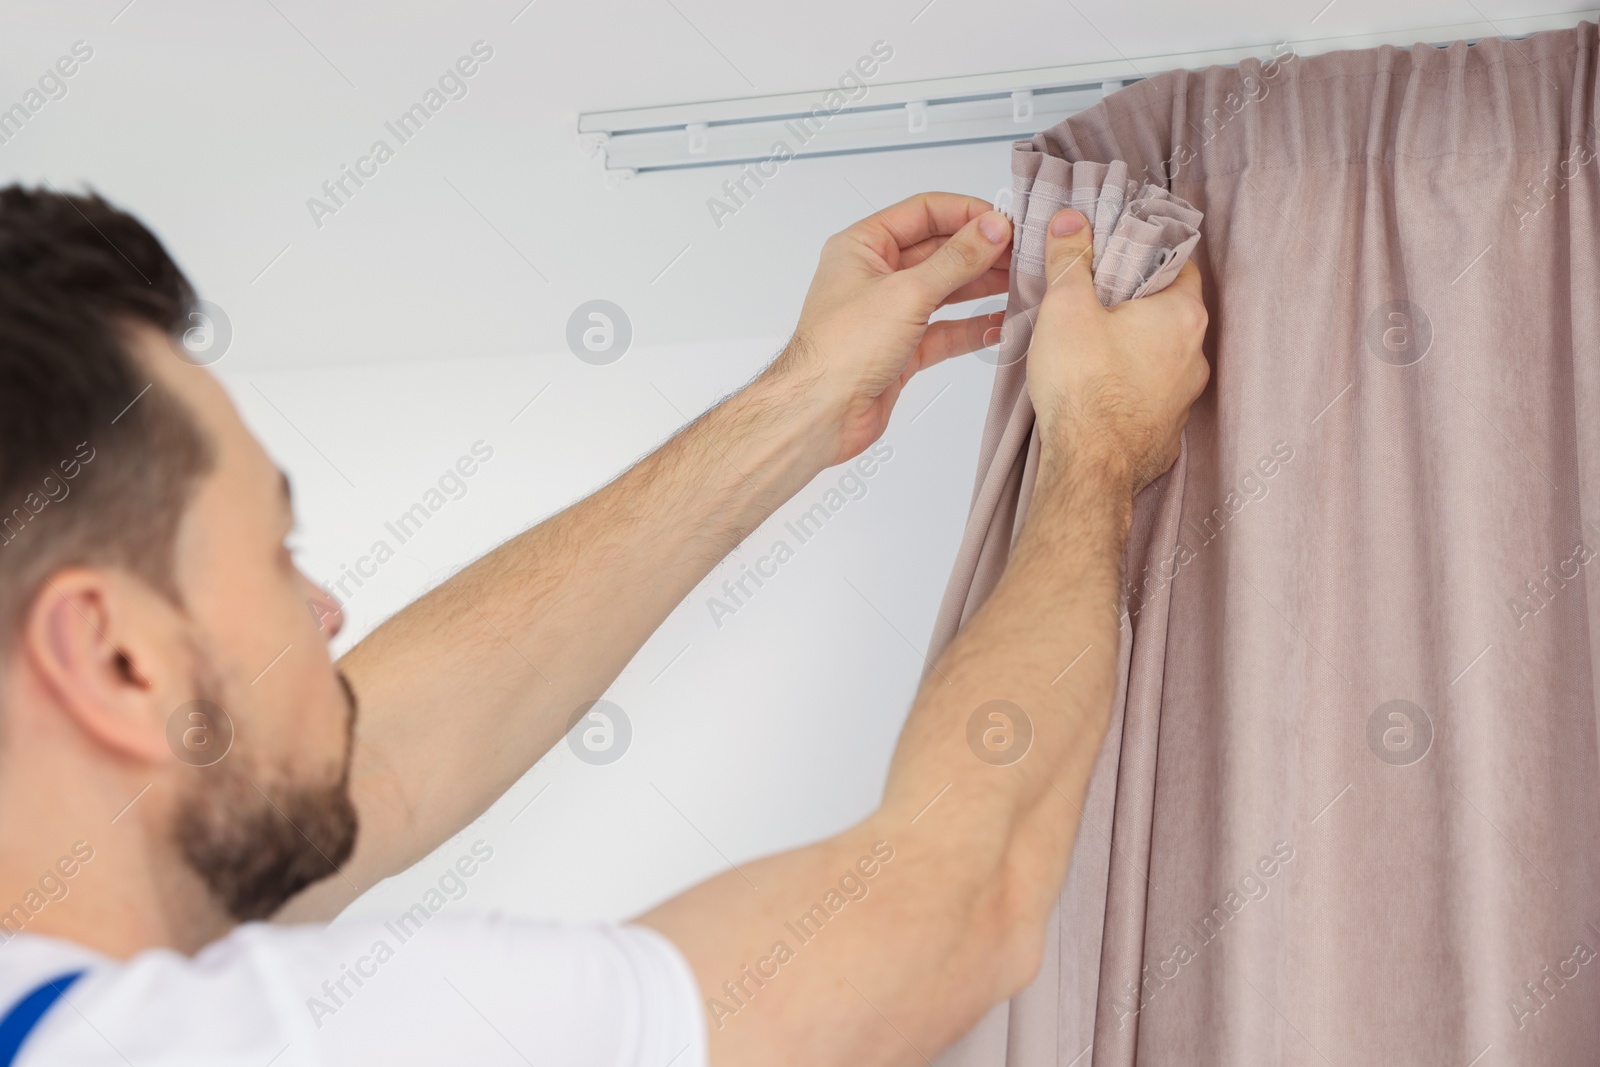 Photo of Worker hanging window curtain, closeup of hands